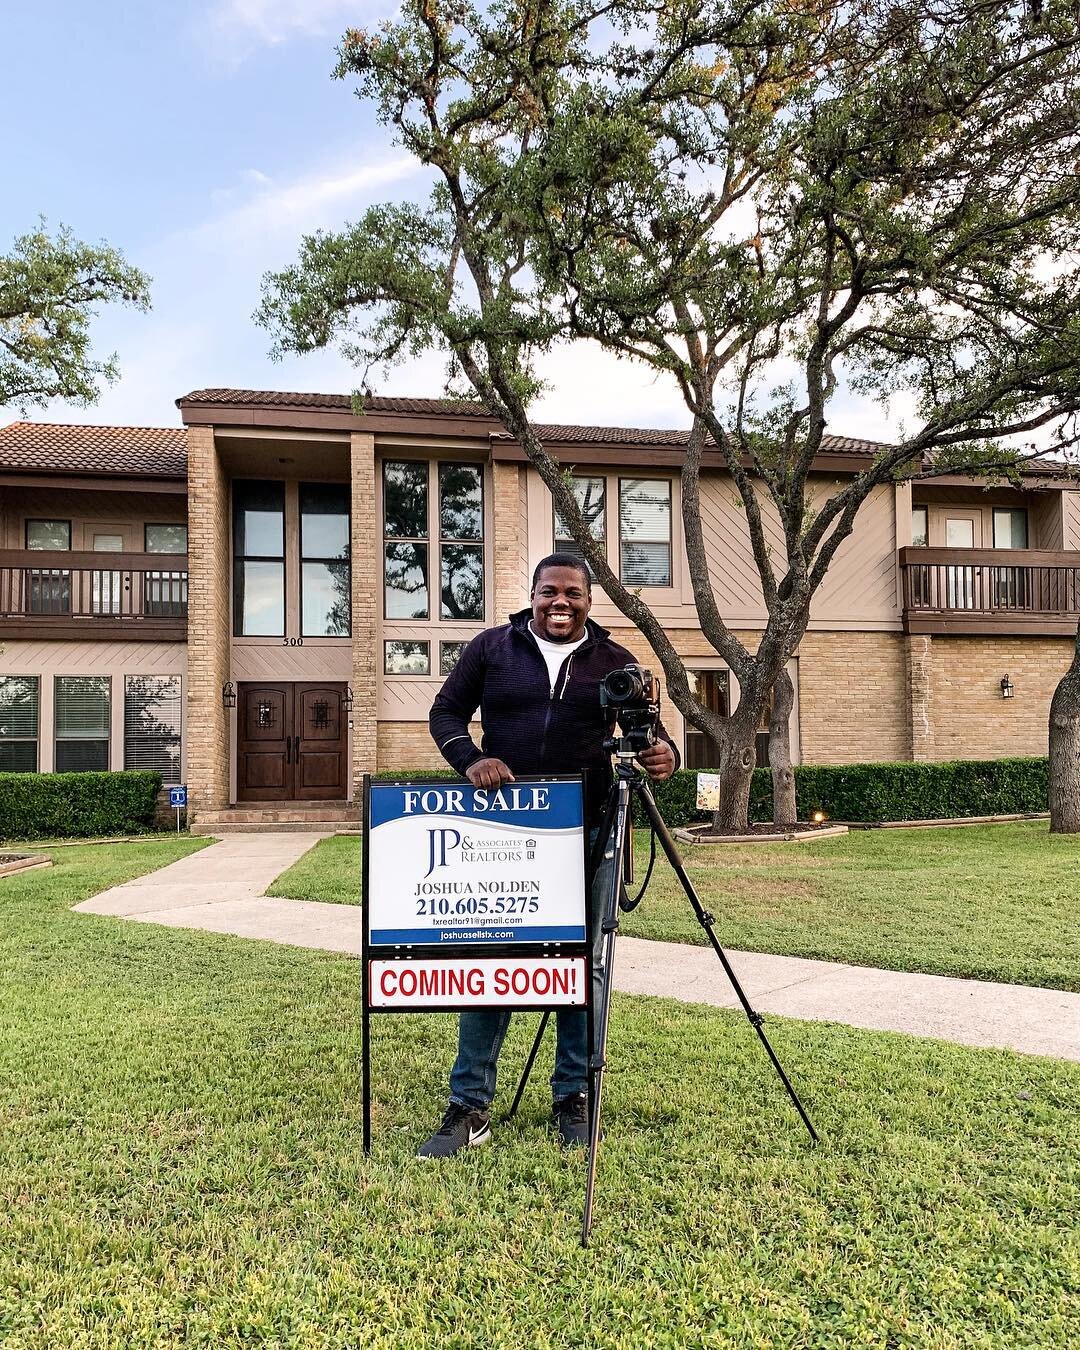 New listing going live this Thursday (4/11/19) in Hollywood Park, Tx for 575K! Professional Pics to come soon by yours truly! Send me message if you or someone you know would like more information about this listing! 🏠😎🔥 #realestate #hustle #profe